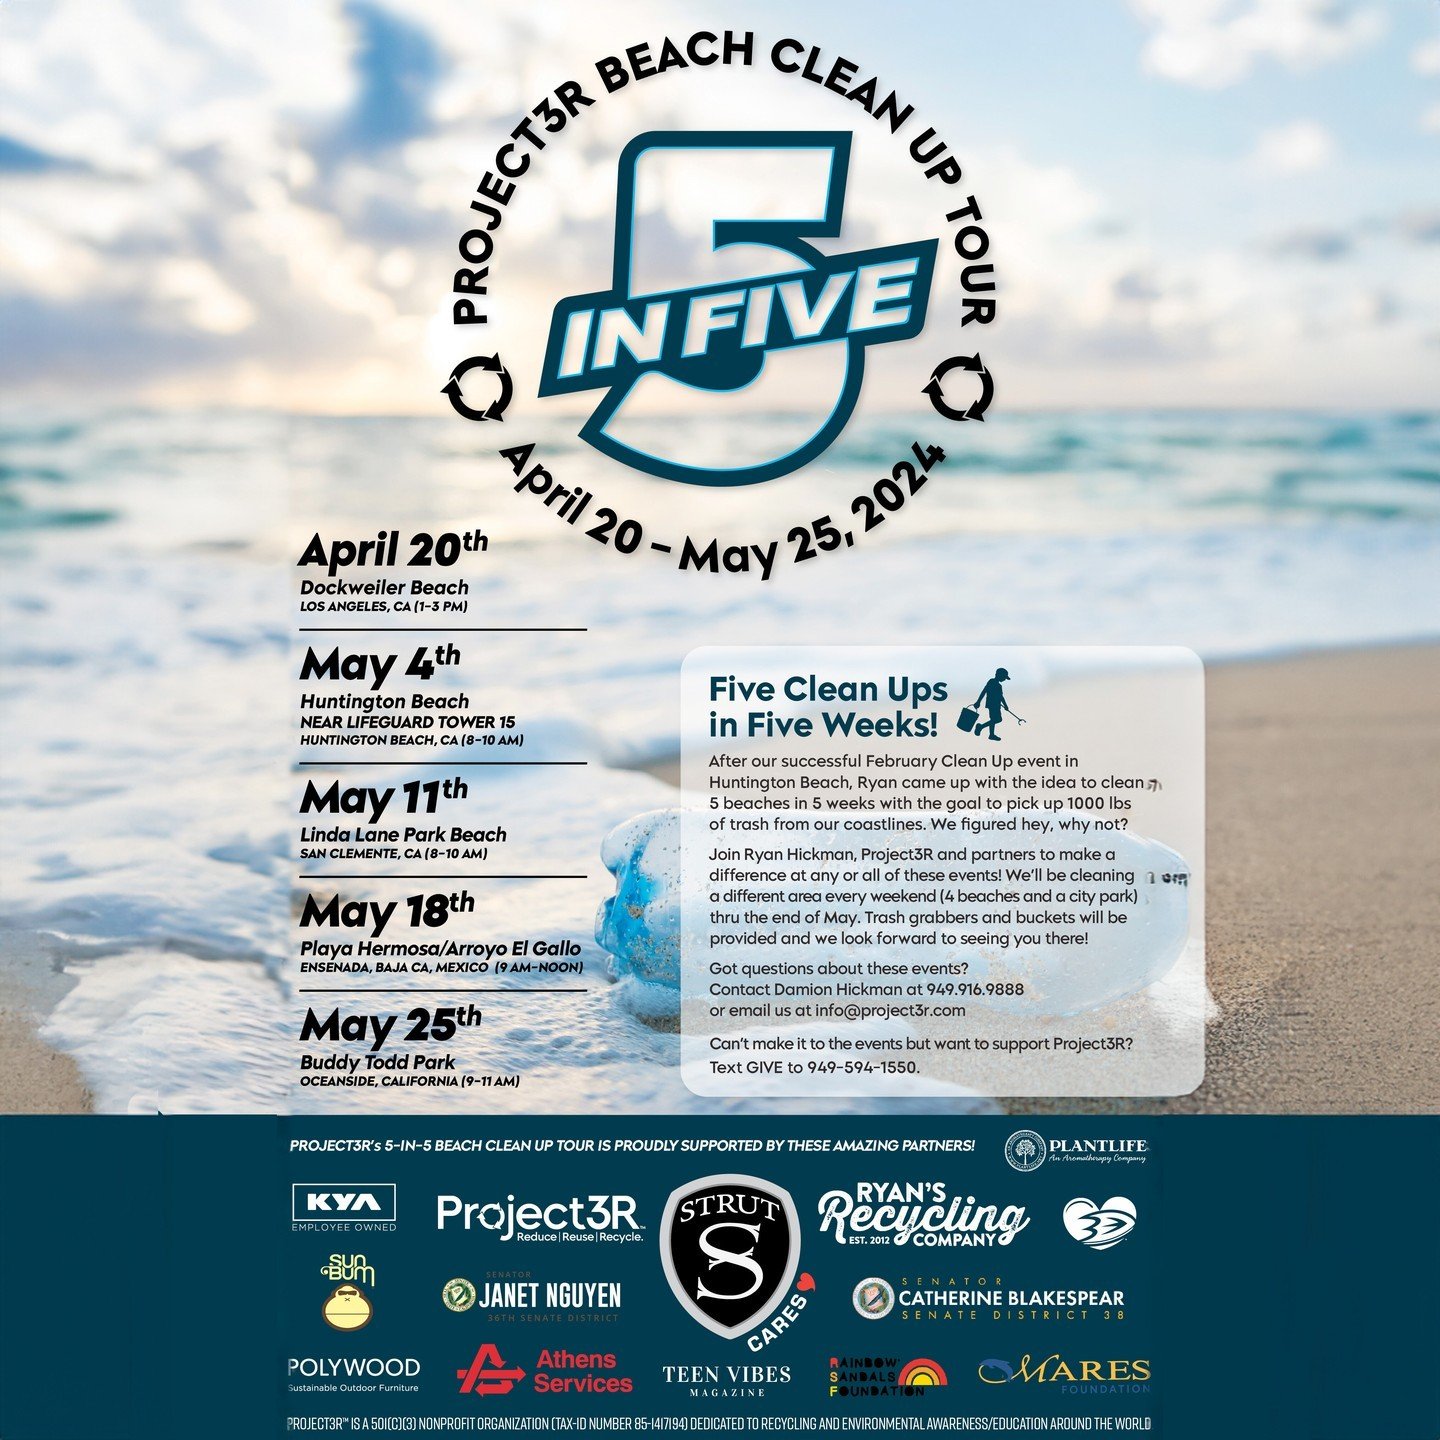 Join us this weekend for a beach clean up with Project 3R! We are proud to partner with Ryan's Recycling and Project 3R along with many other awesome companies to help keep our beaches clean. #CreatingABetterPlace #beachcleanup